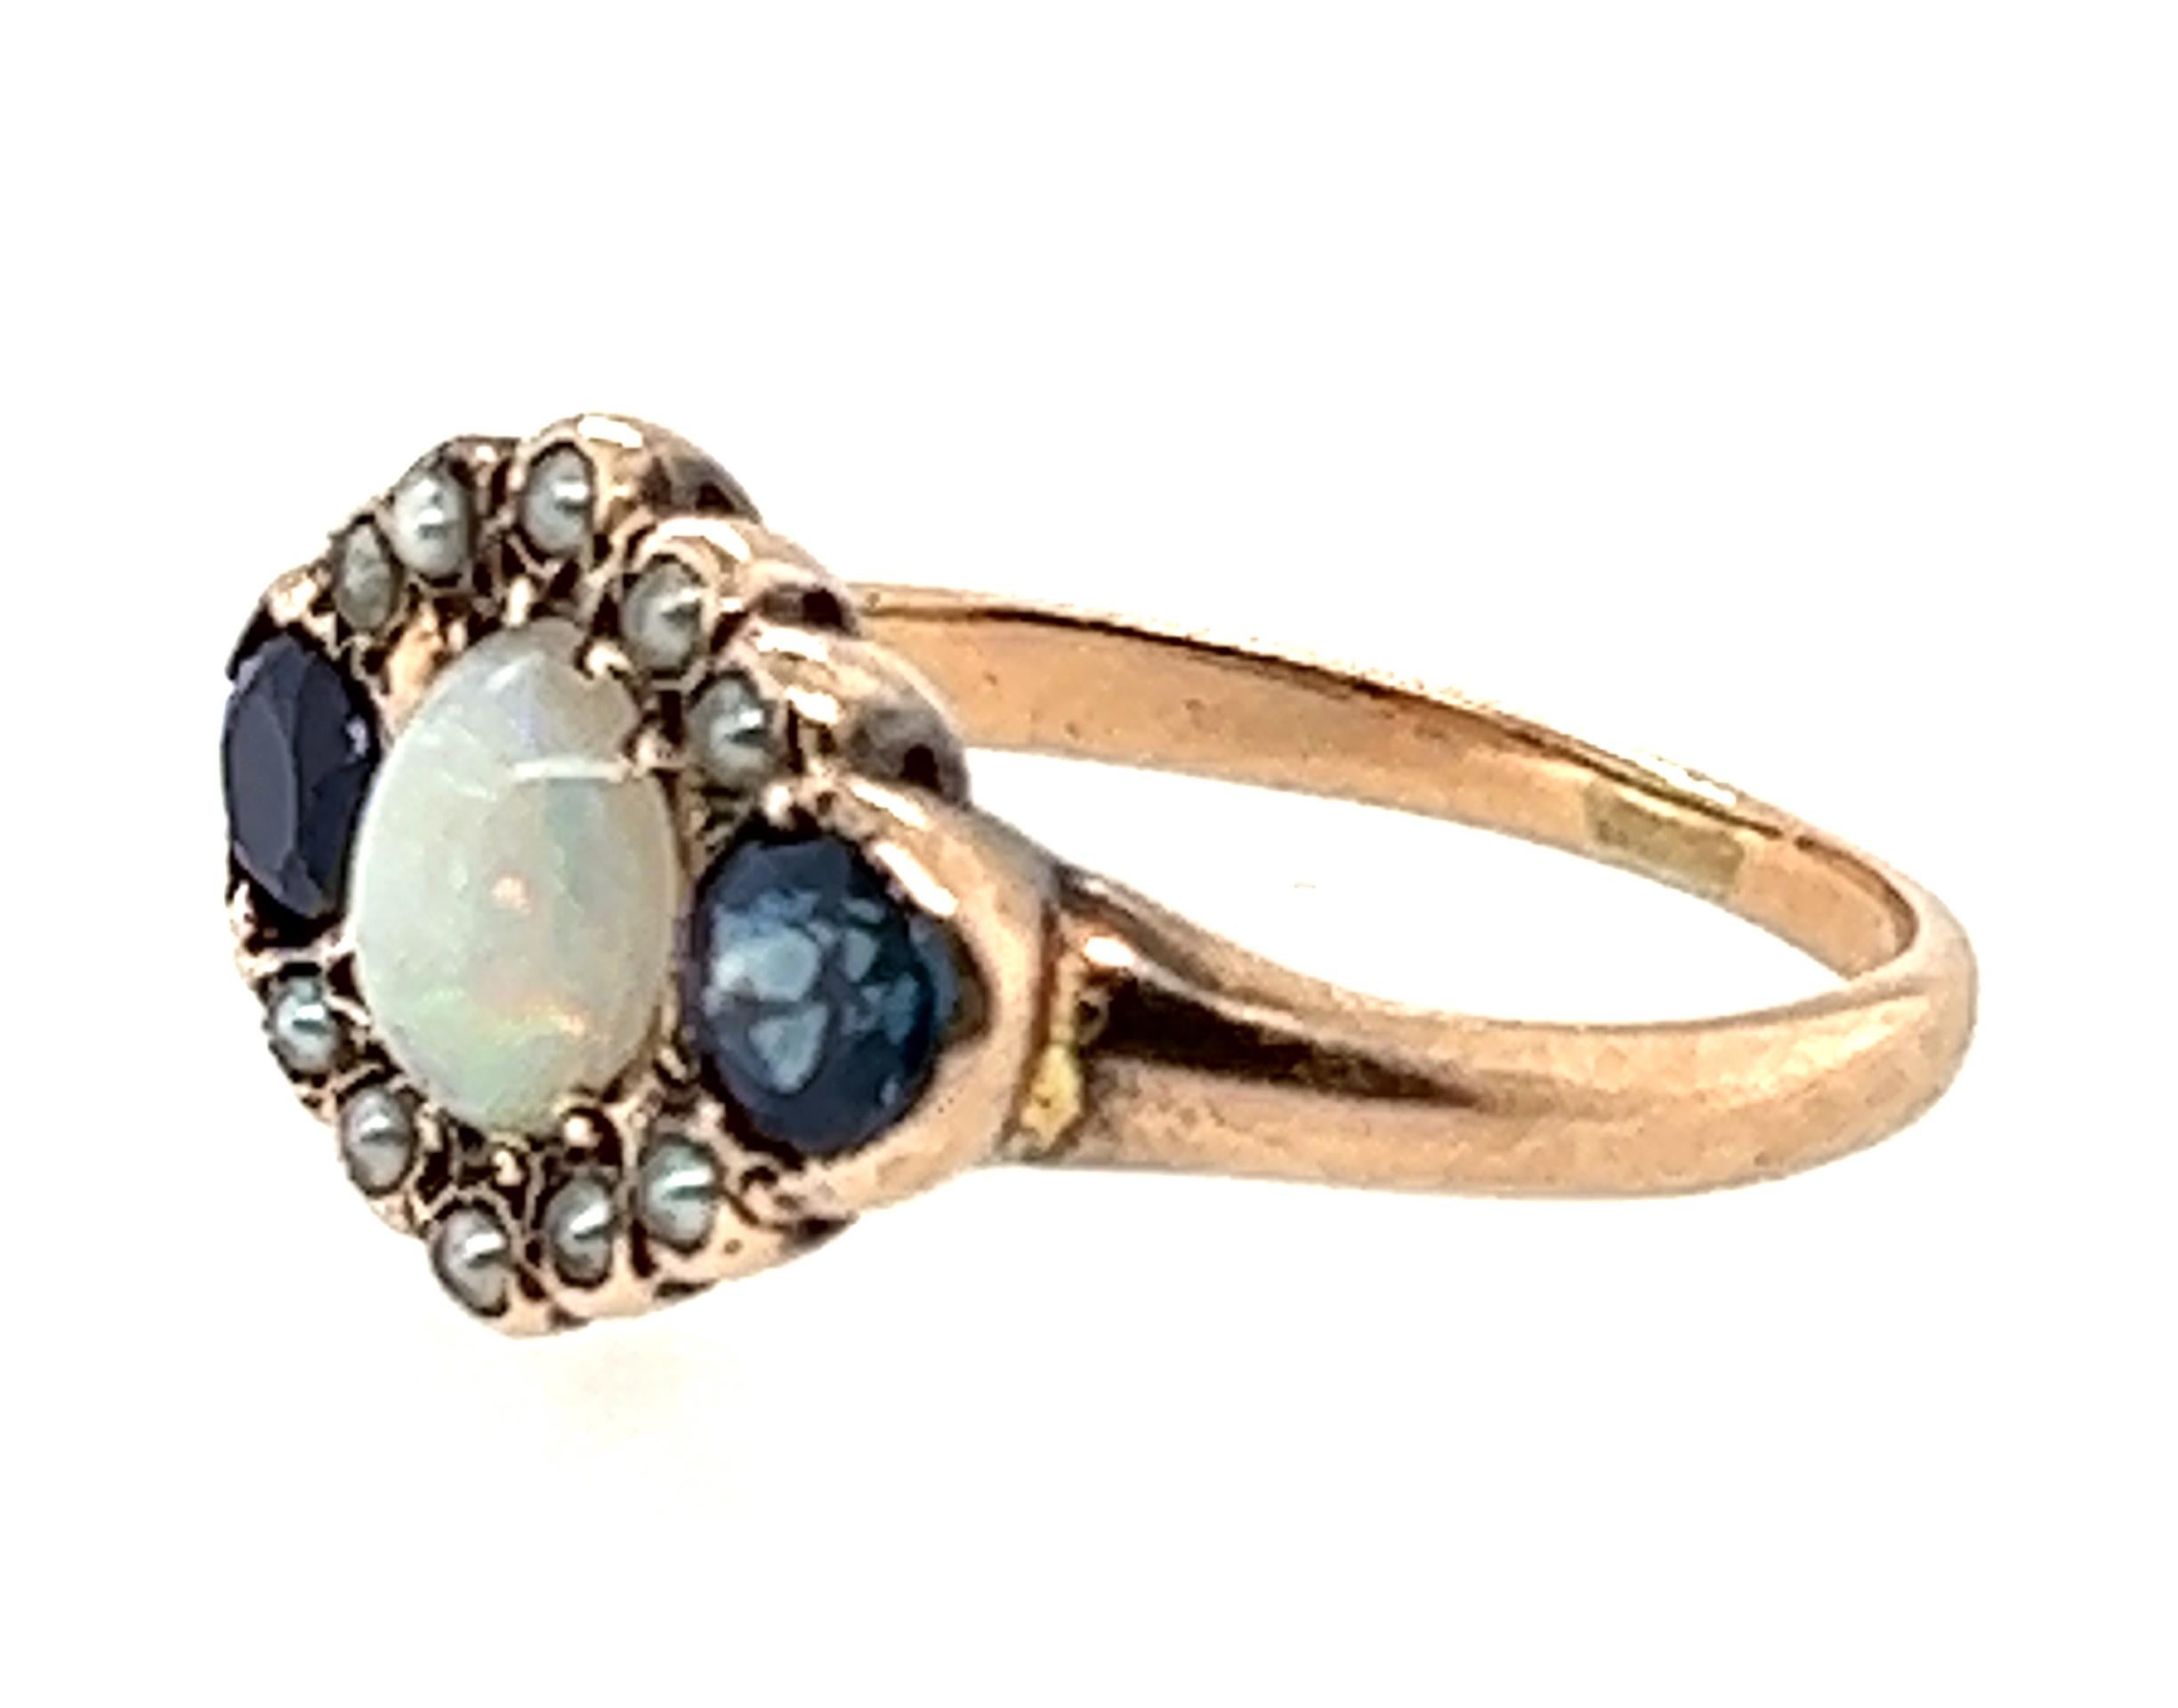 Cabochon Victorian Opal Sapphire Seed Pearl .60ct Cocktail Ring 14k Antique Original 1880